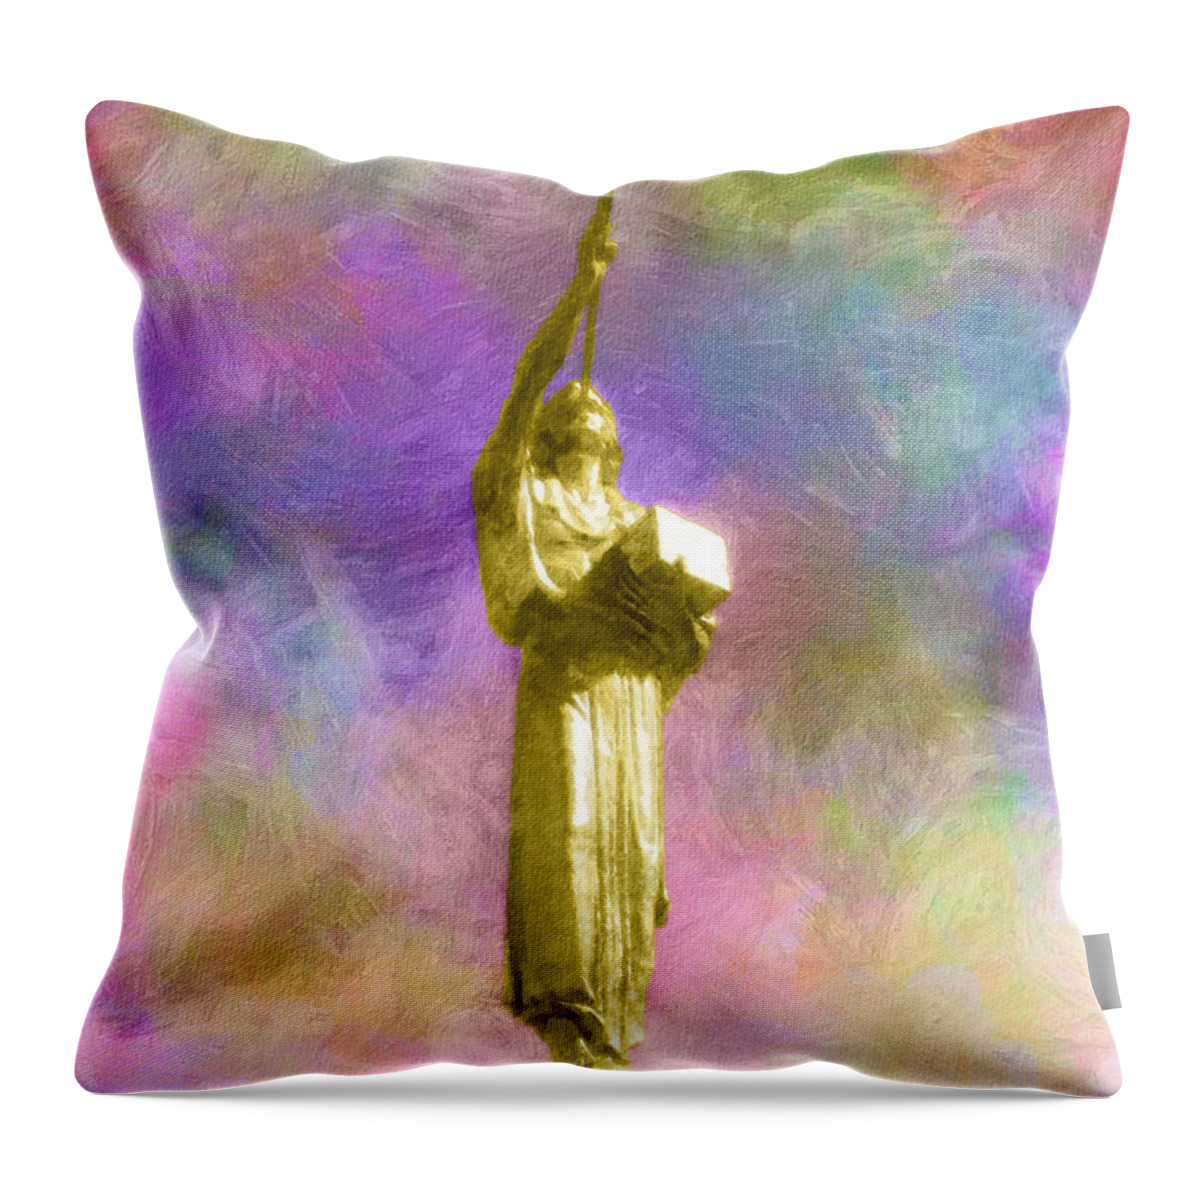 Moroni Throw Pillow featuring the painting The Morning Breaks by Greg Collins